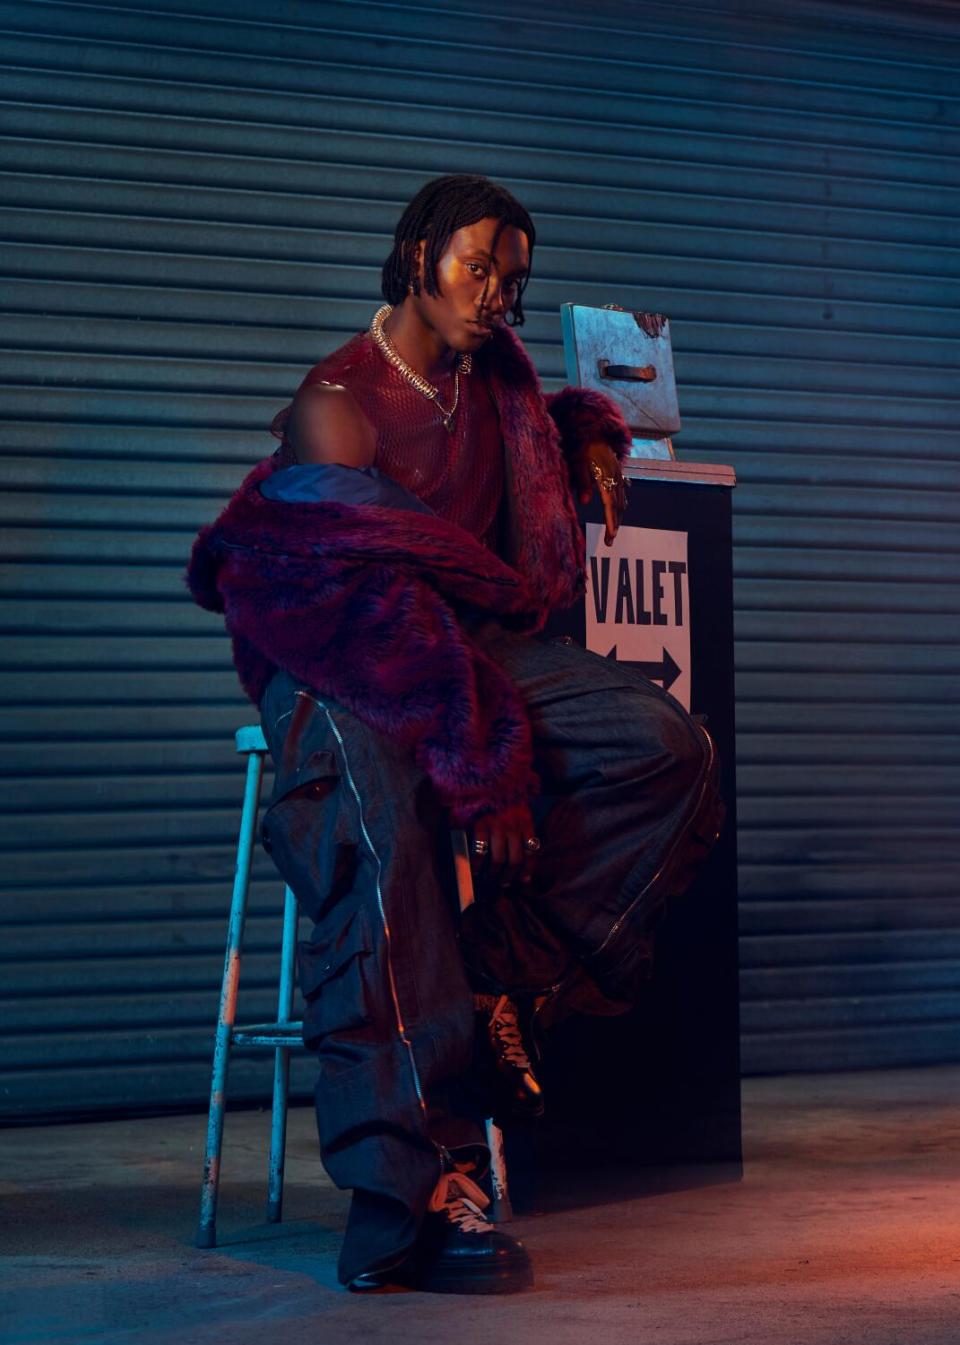 A model sits beside a "Valet" sign, his Givenchy jacket falling off his shoulders.